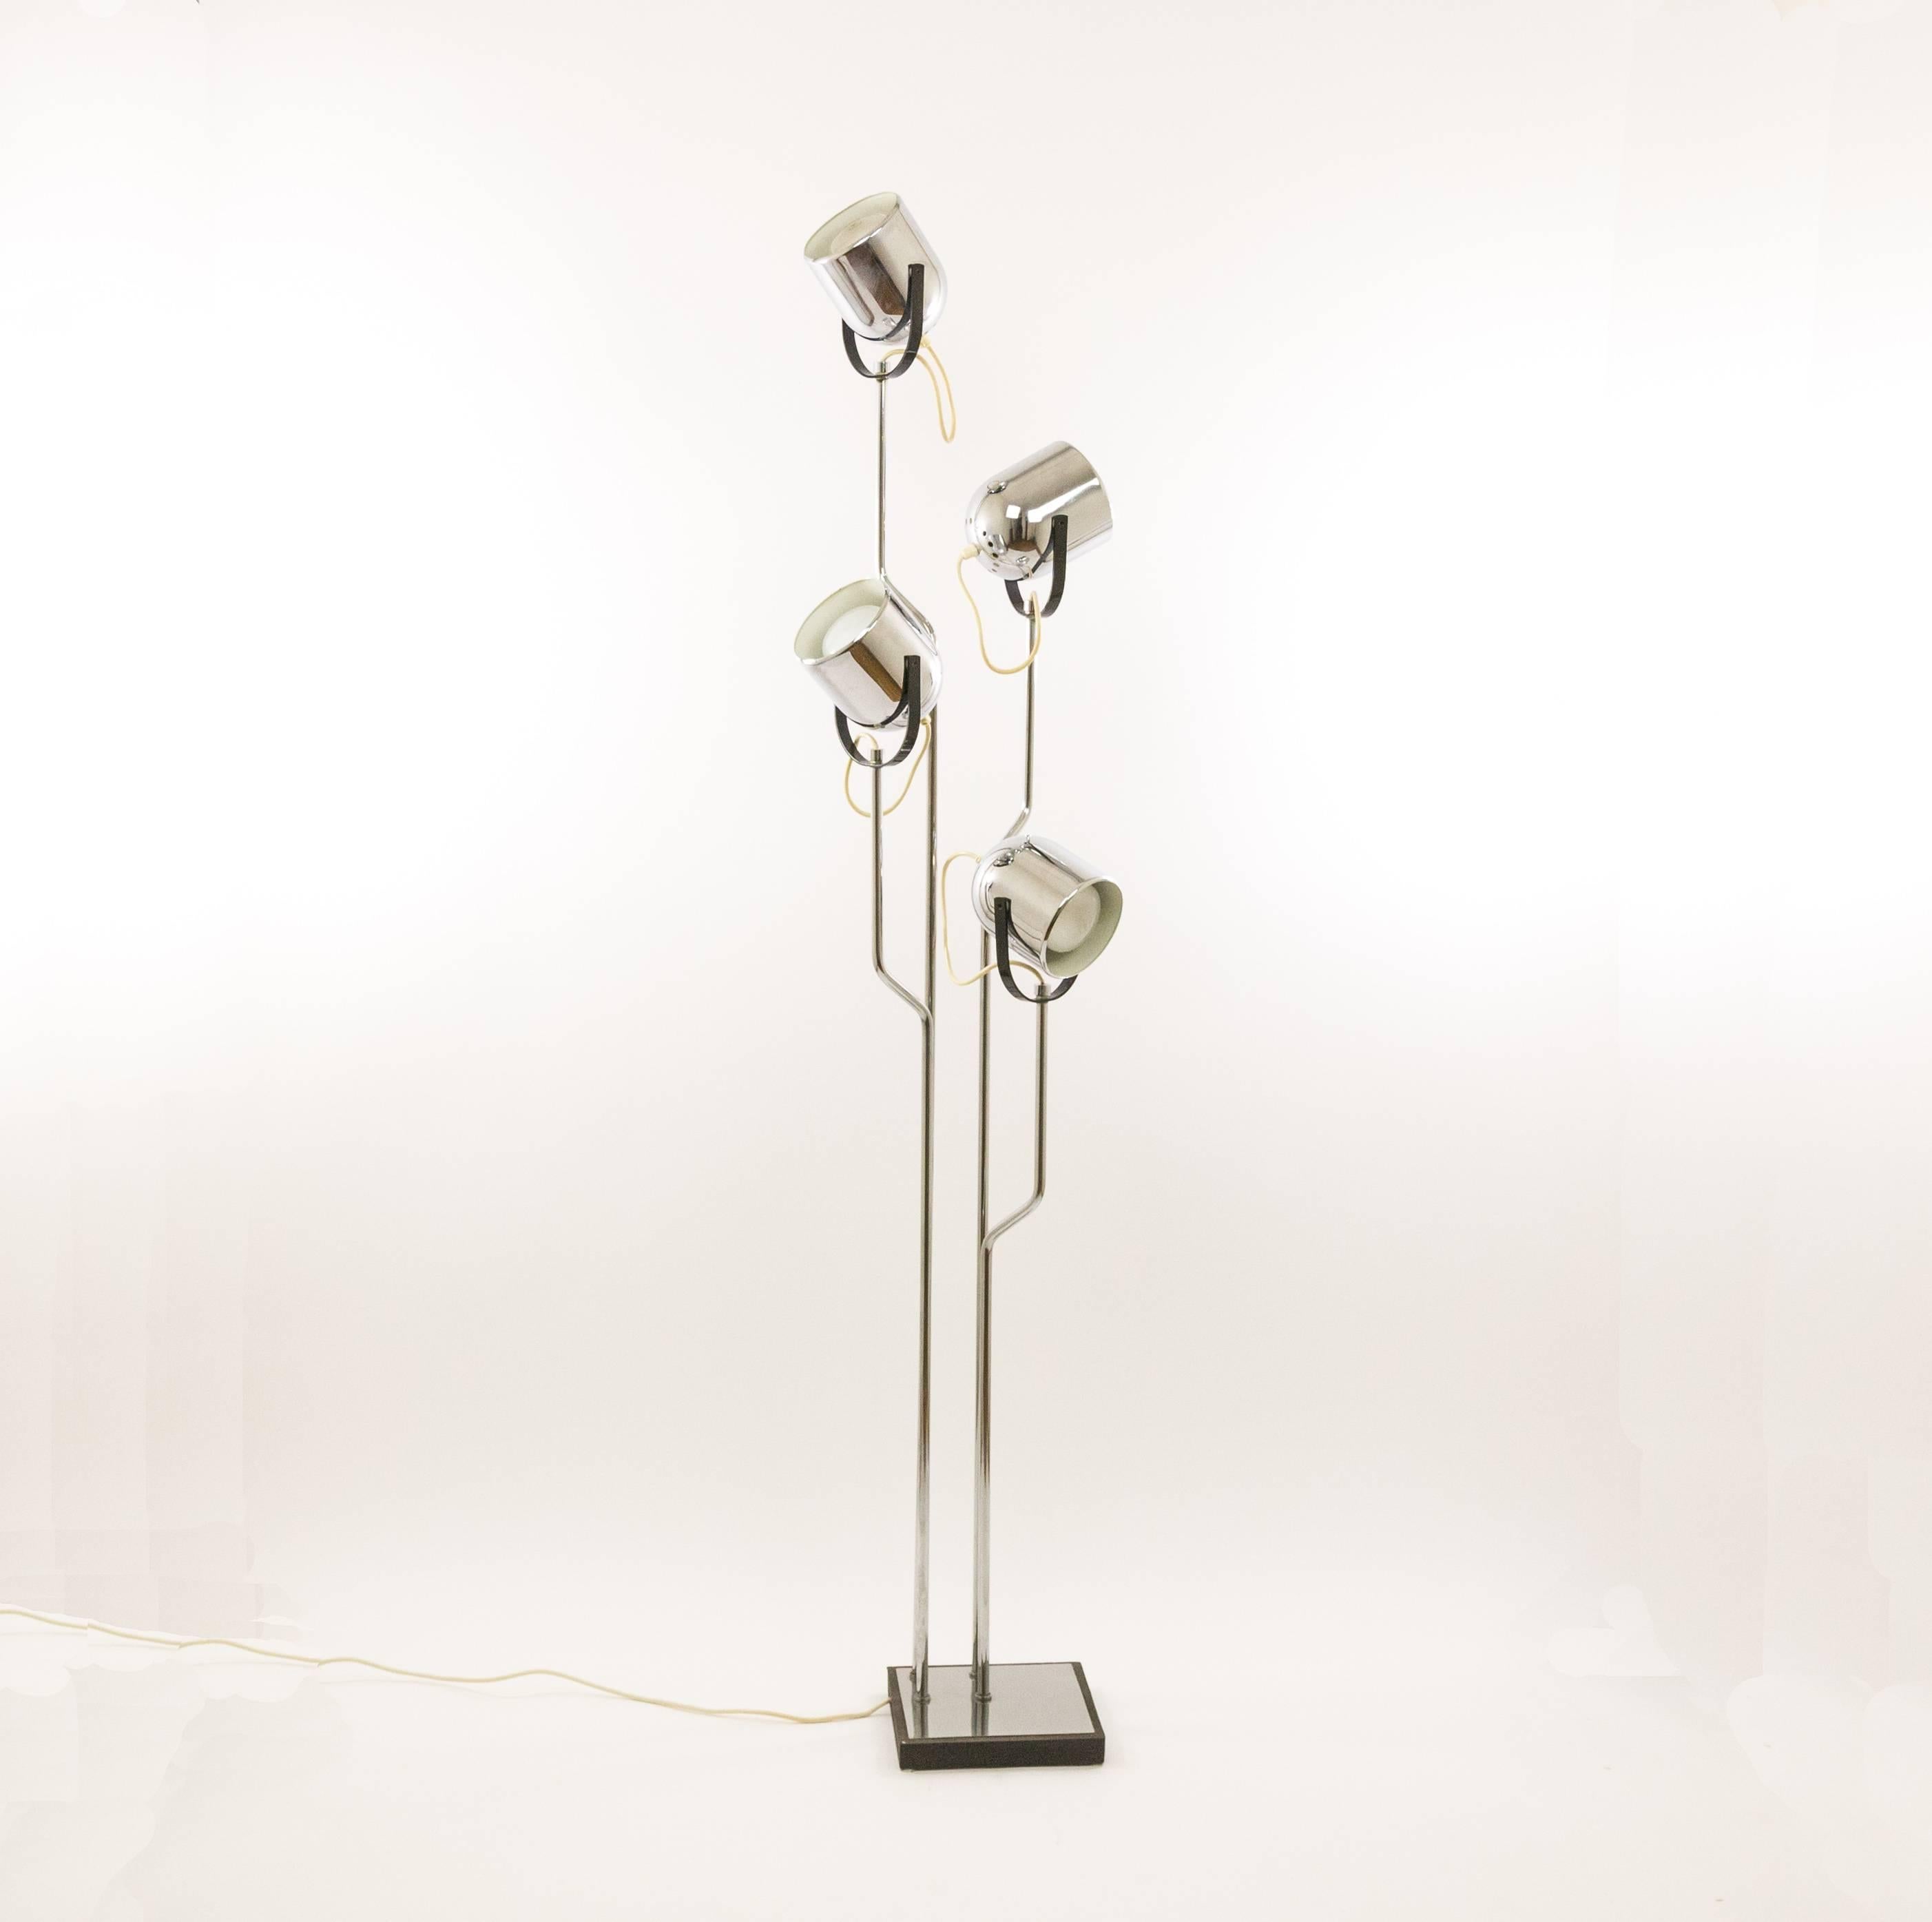 Chromed floor lamp by Goffredo Reggiani with four spotlights that can be moved independently. The shades that are made of chromed metal are coated white on the inside. The lamps has four stems that are nicely bent and add to its appeal. 

The base